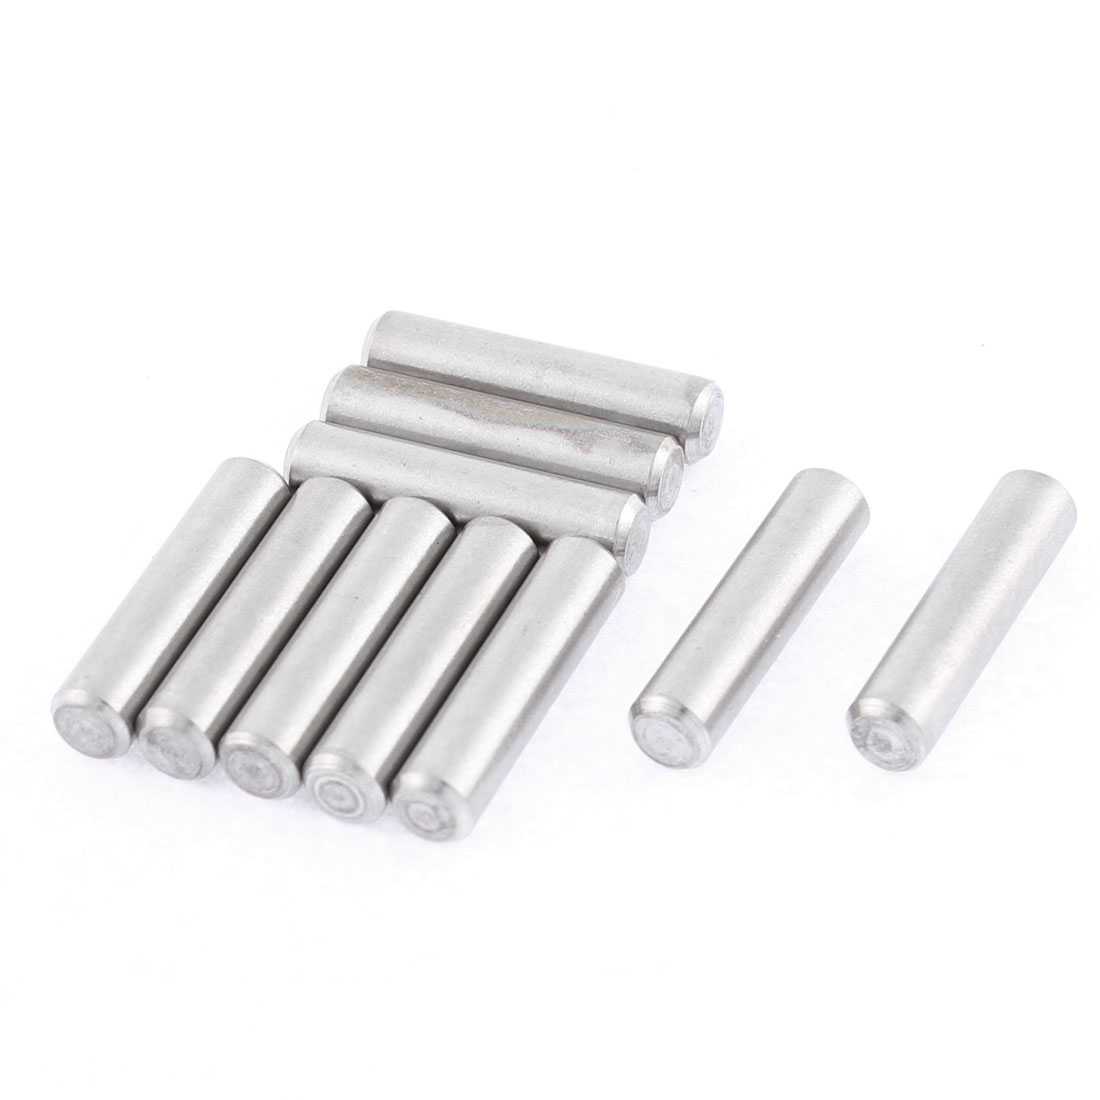 M6x25mm Stainless Steel Straight Retaining Dowel Pins Rod Fasten Elements 10 Pcs